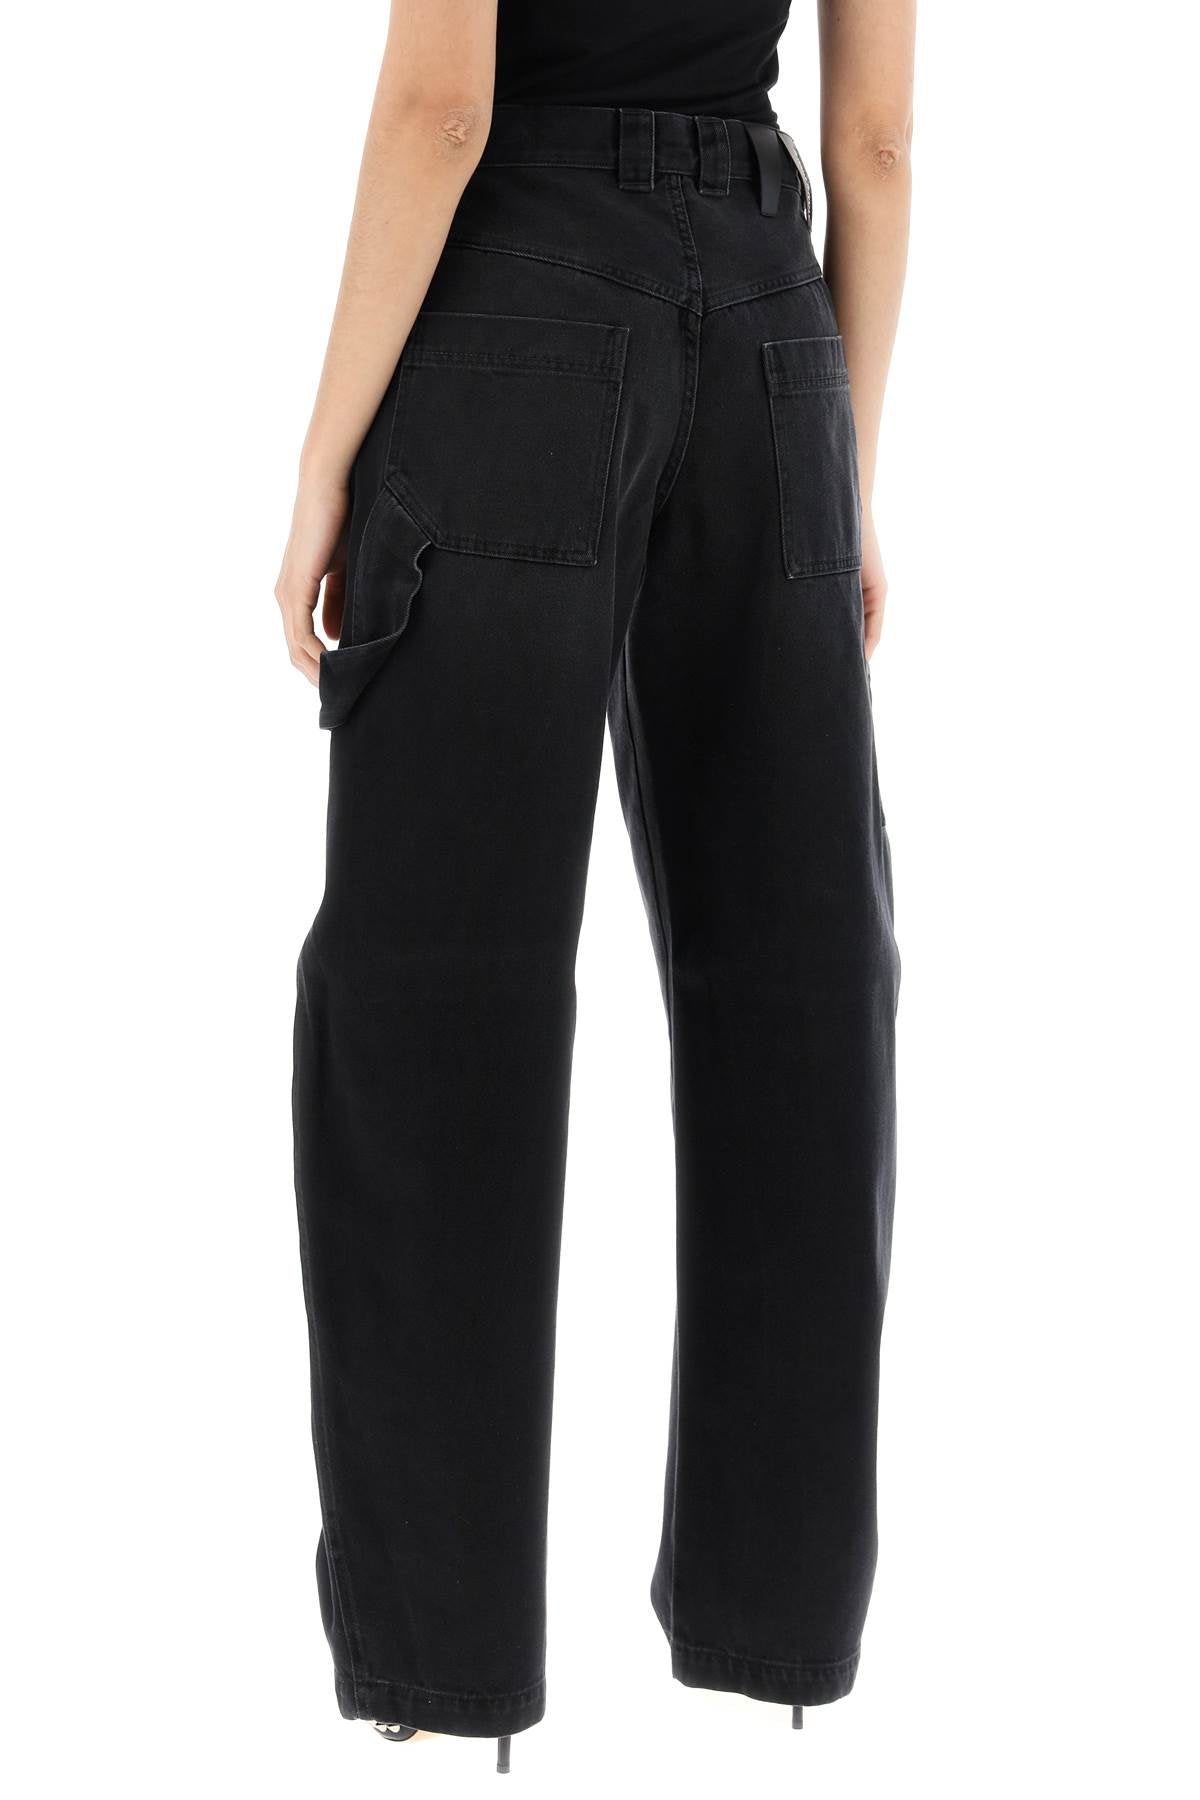 Darkpark audrey cargo jeans with curved leg-2